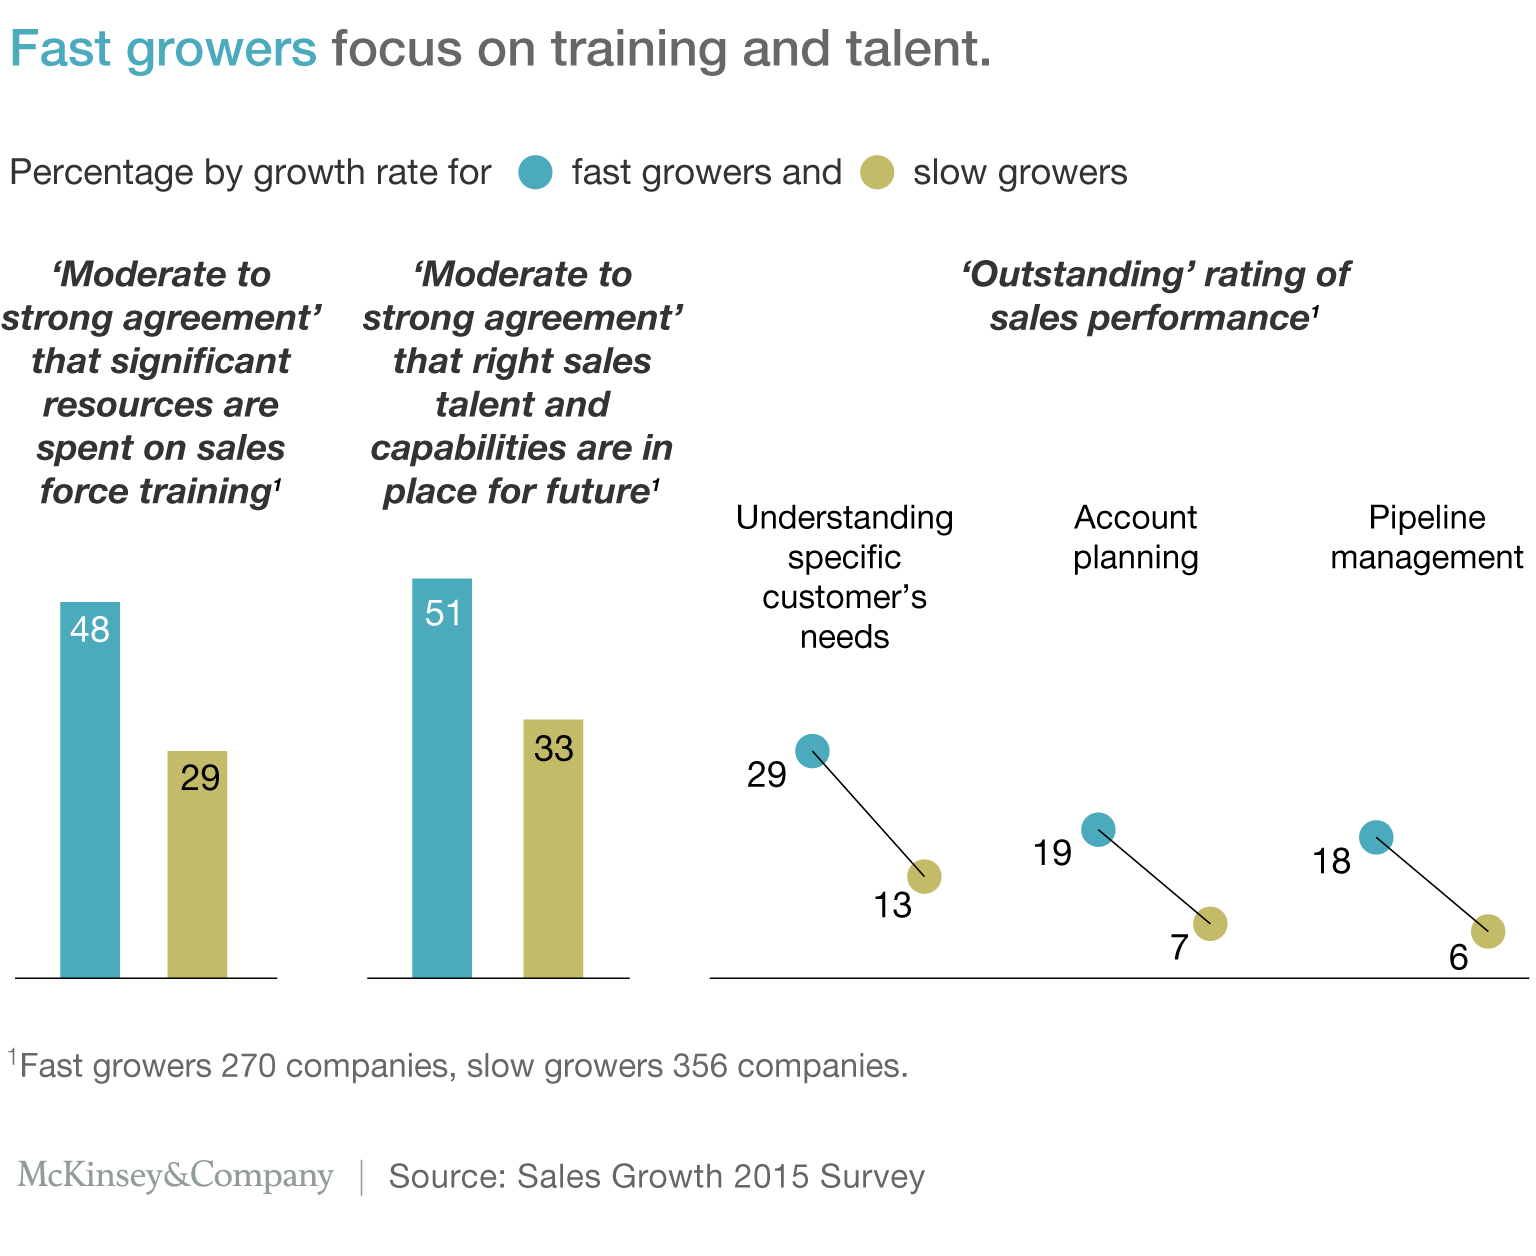 Exhibit 4: Fast growers focus on training and talent